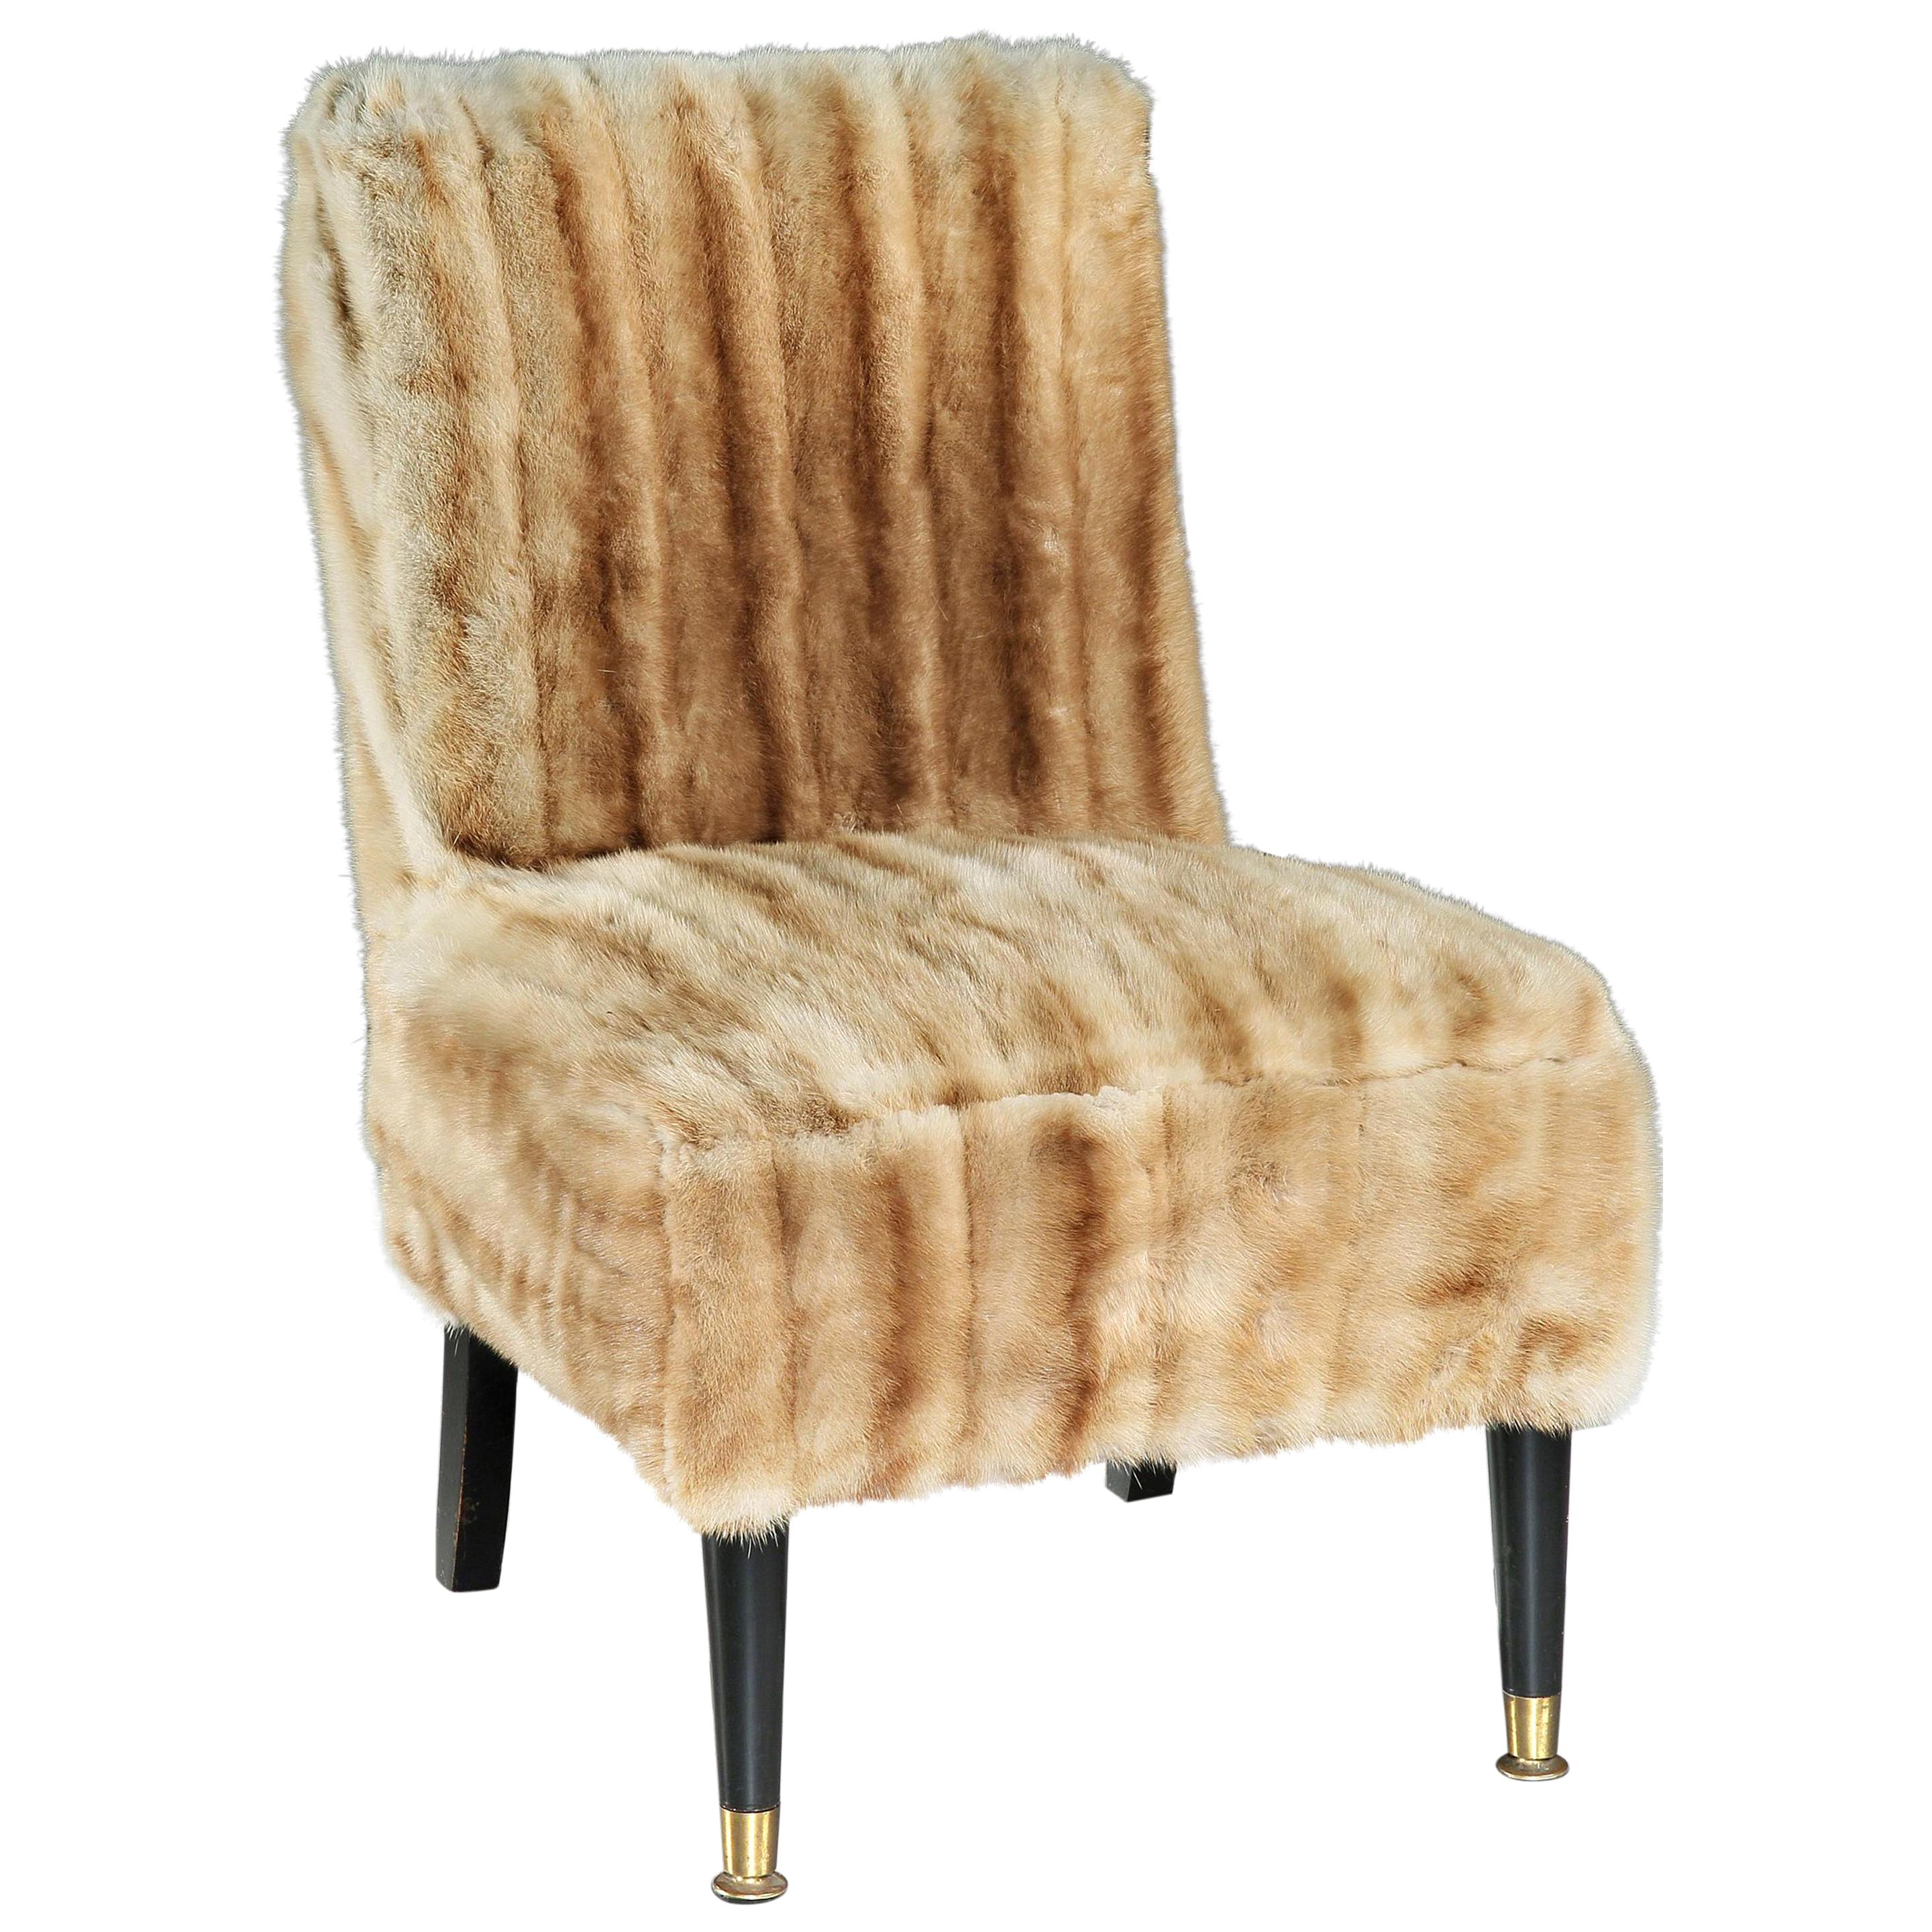 Chair, 20th Century, English, Modern, Upholstered, Mink For Sale